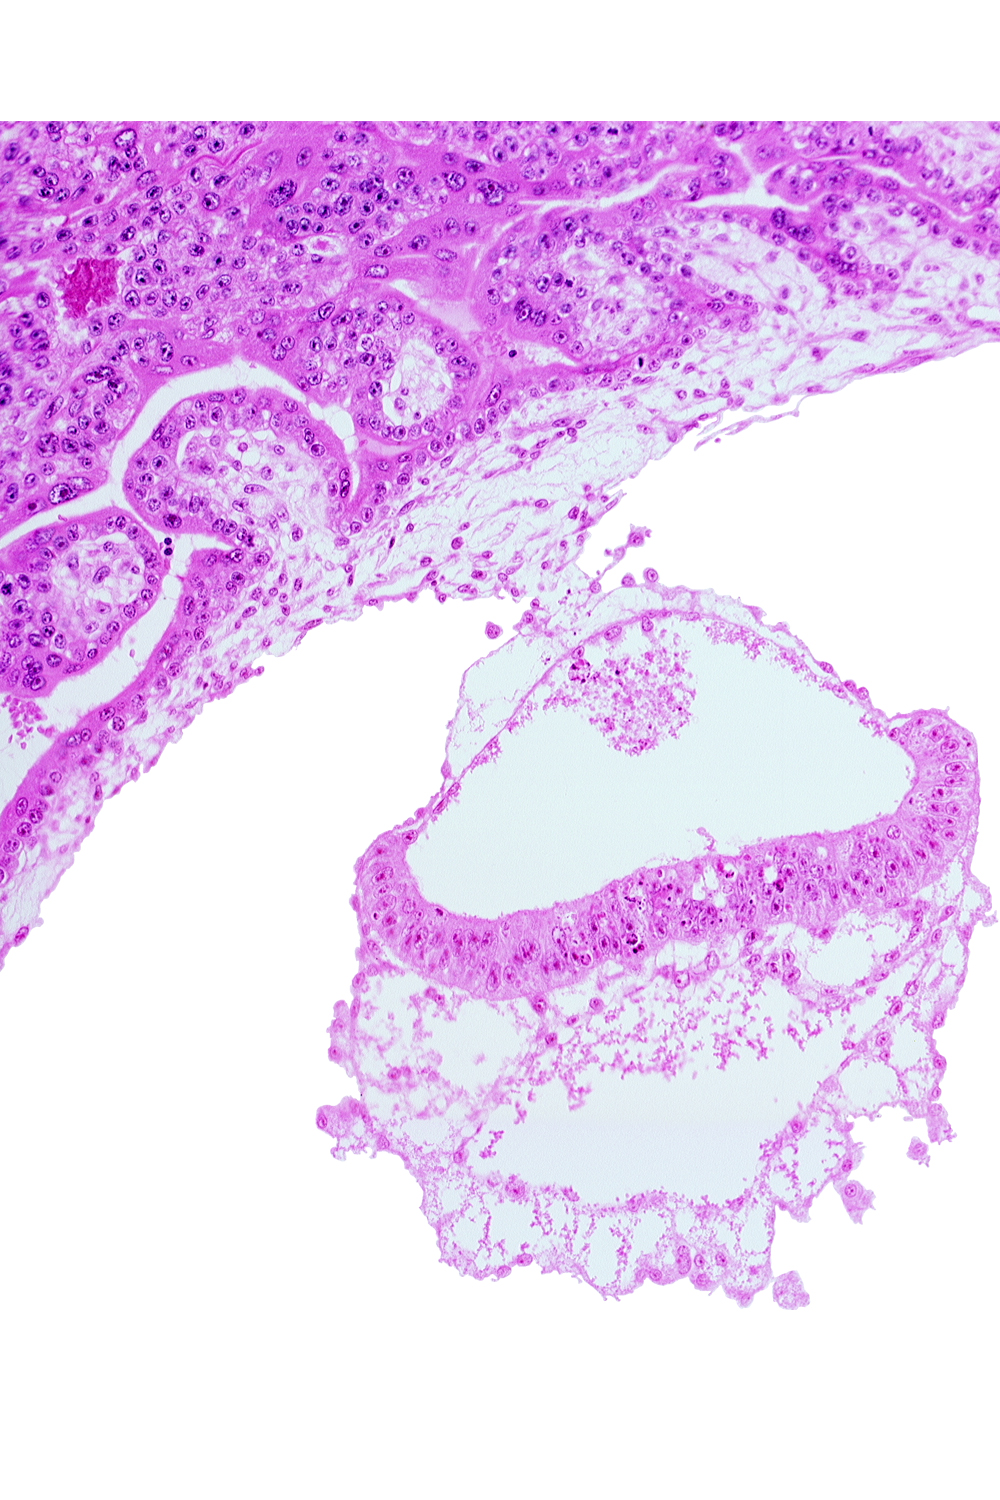 connecting stalk, extra-embryonic coelom, junction of amnion and epiblast plate, two-layered amnion, umbilical vesicle wall